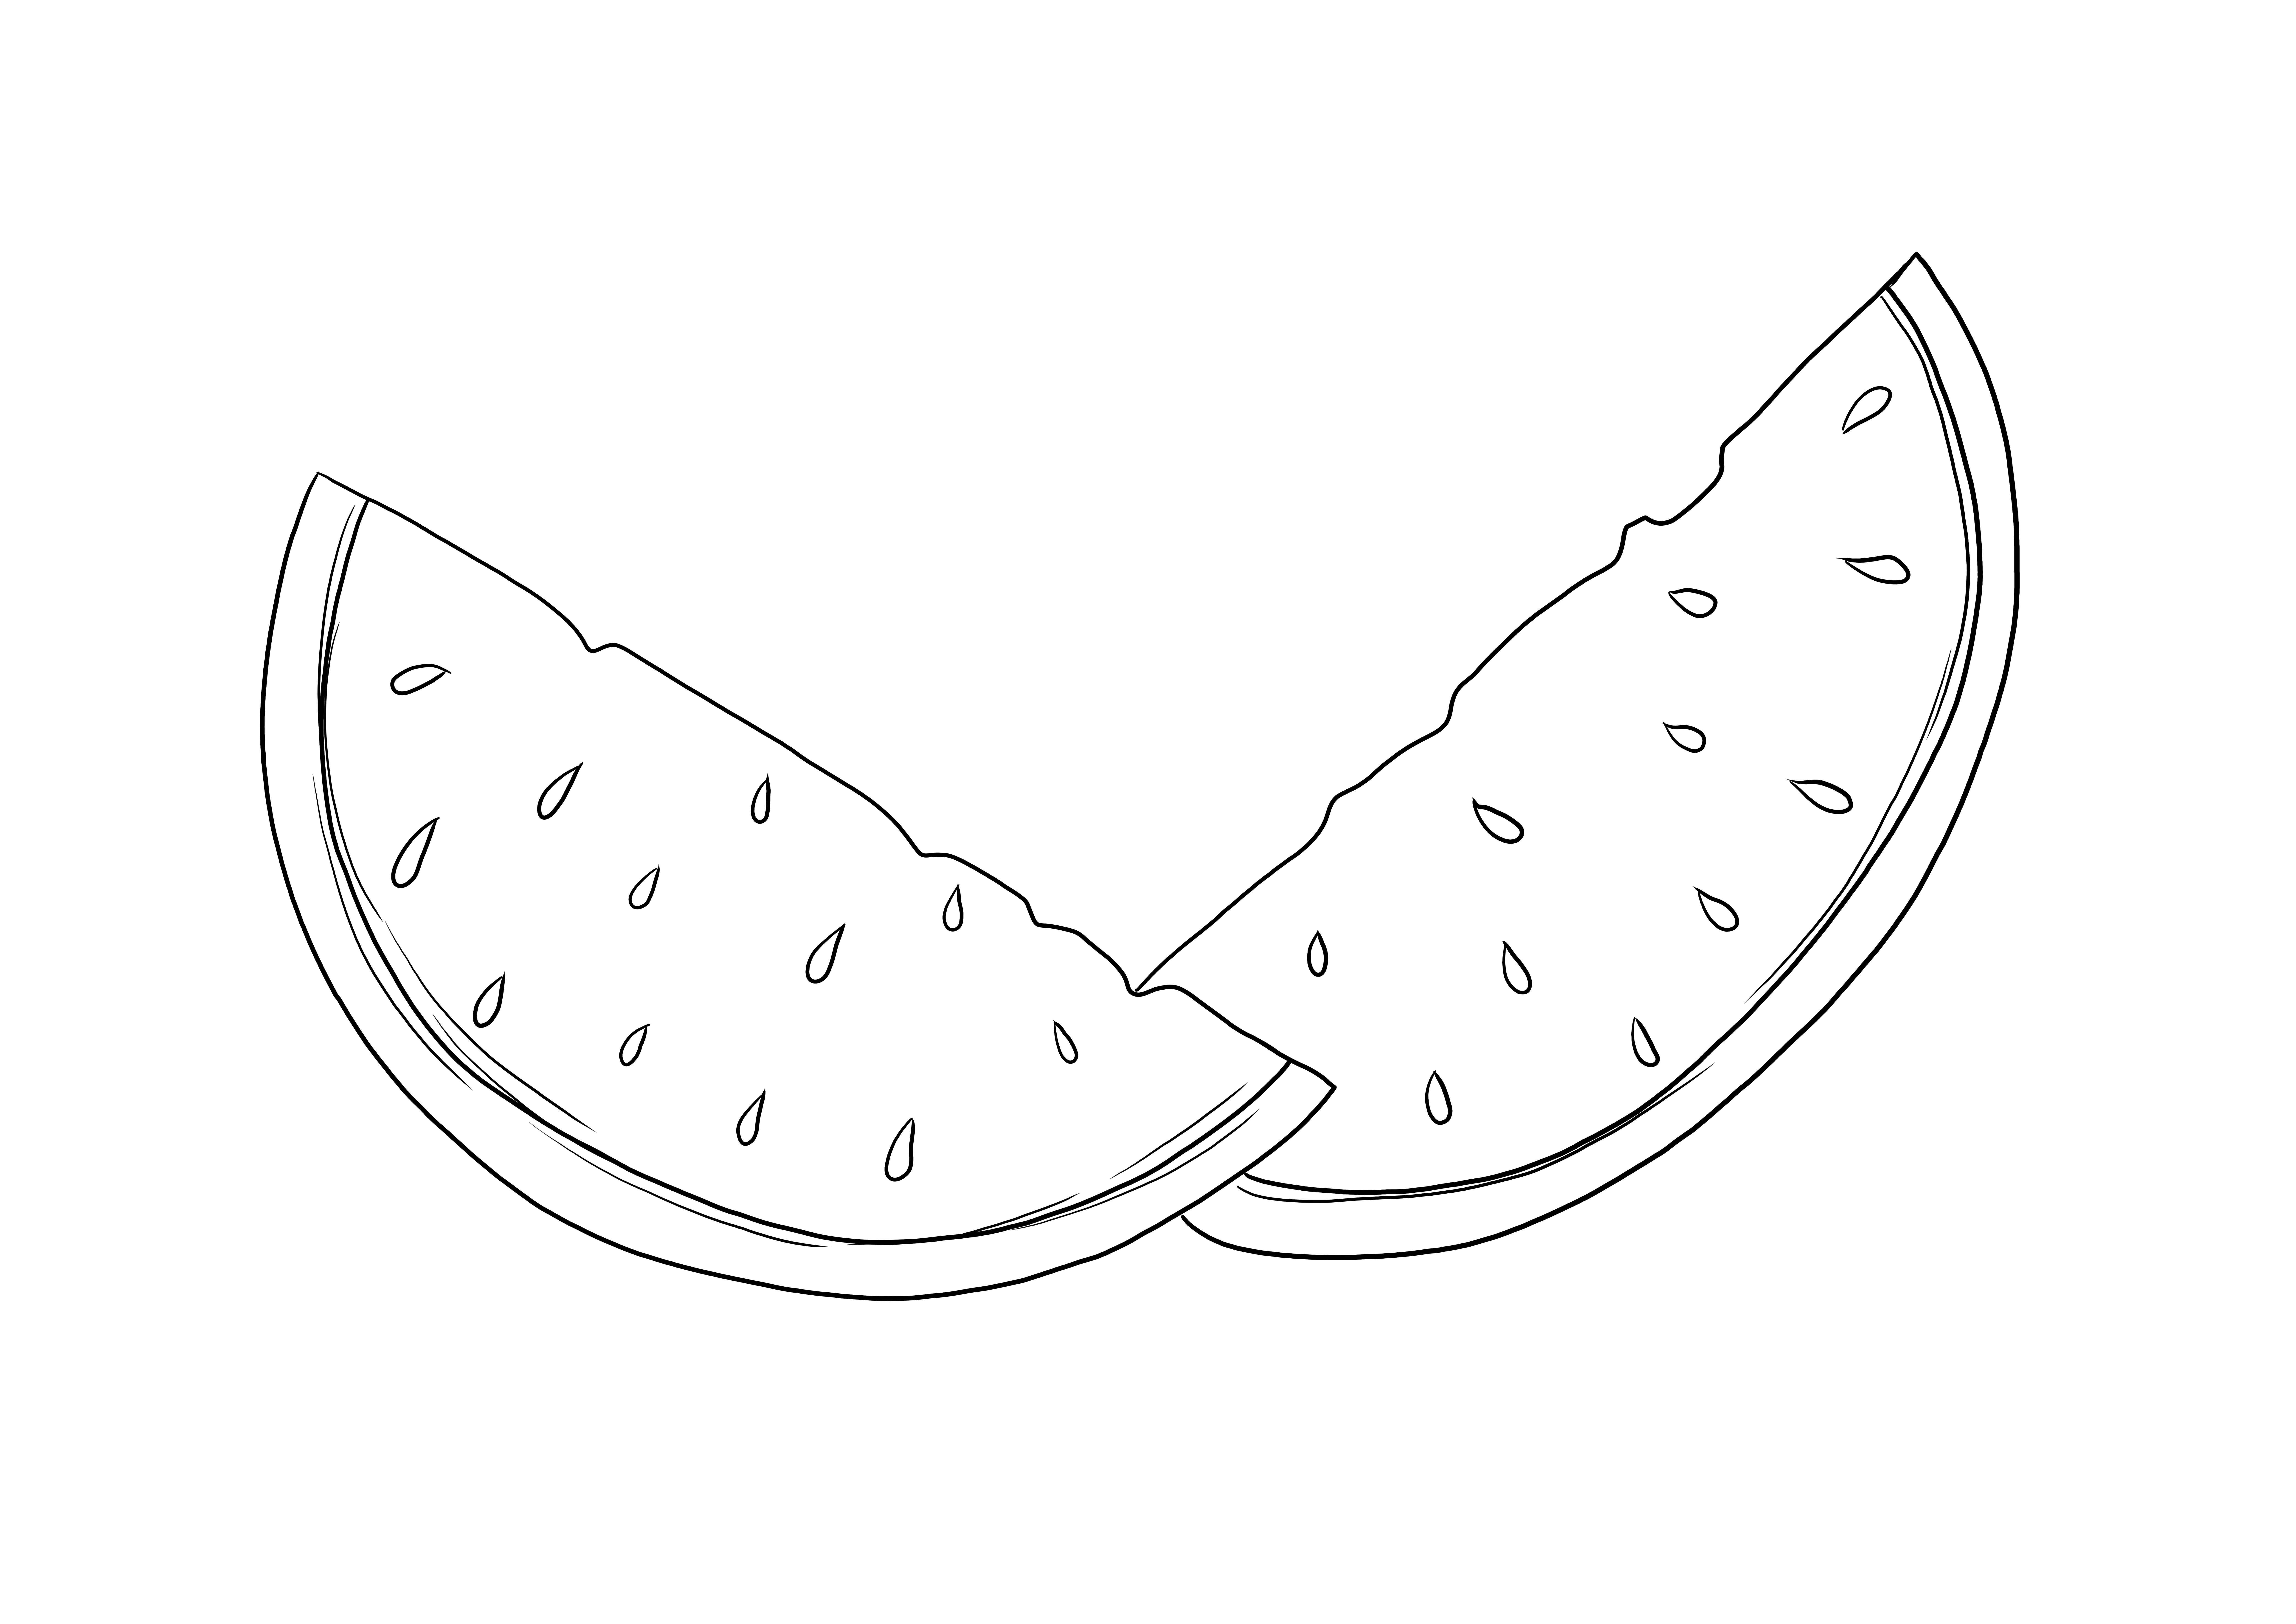 Two big slices of watermelon free coloring picture to save or download for free.